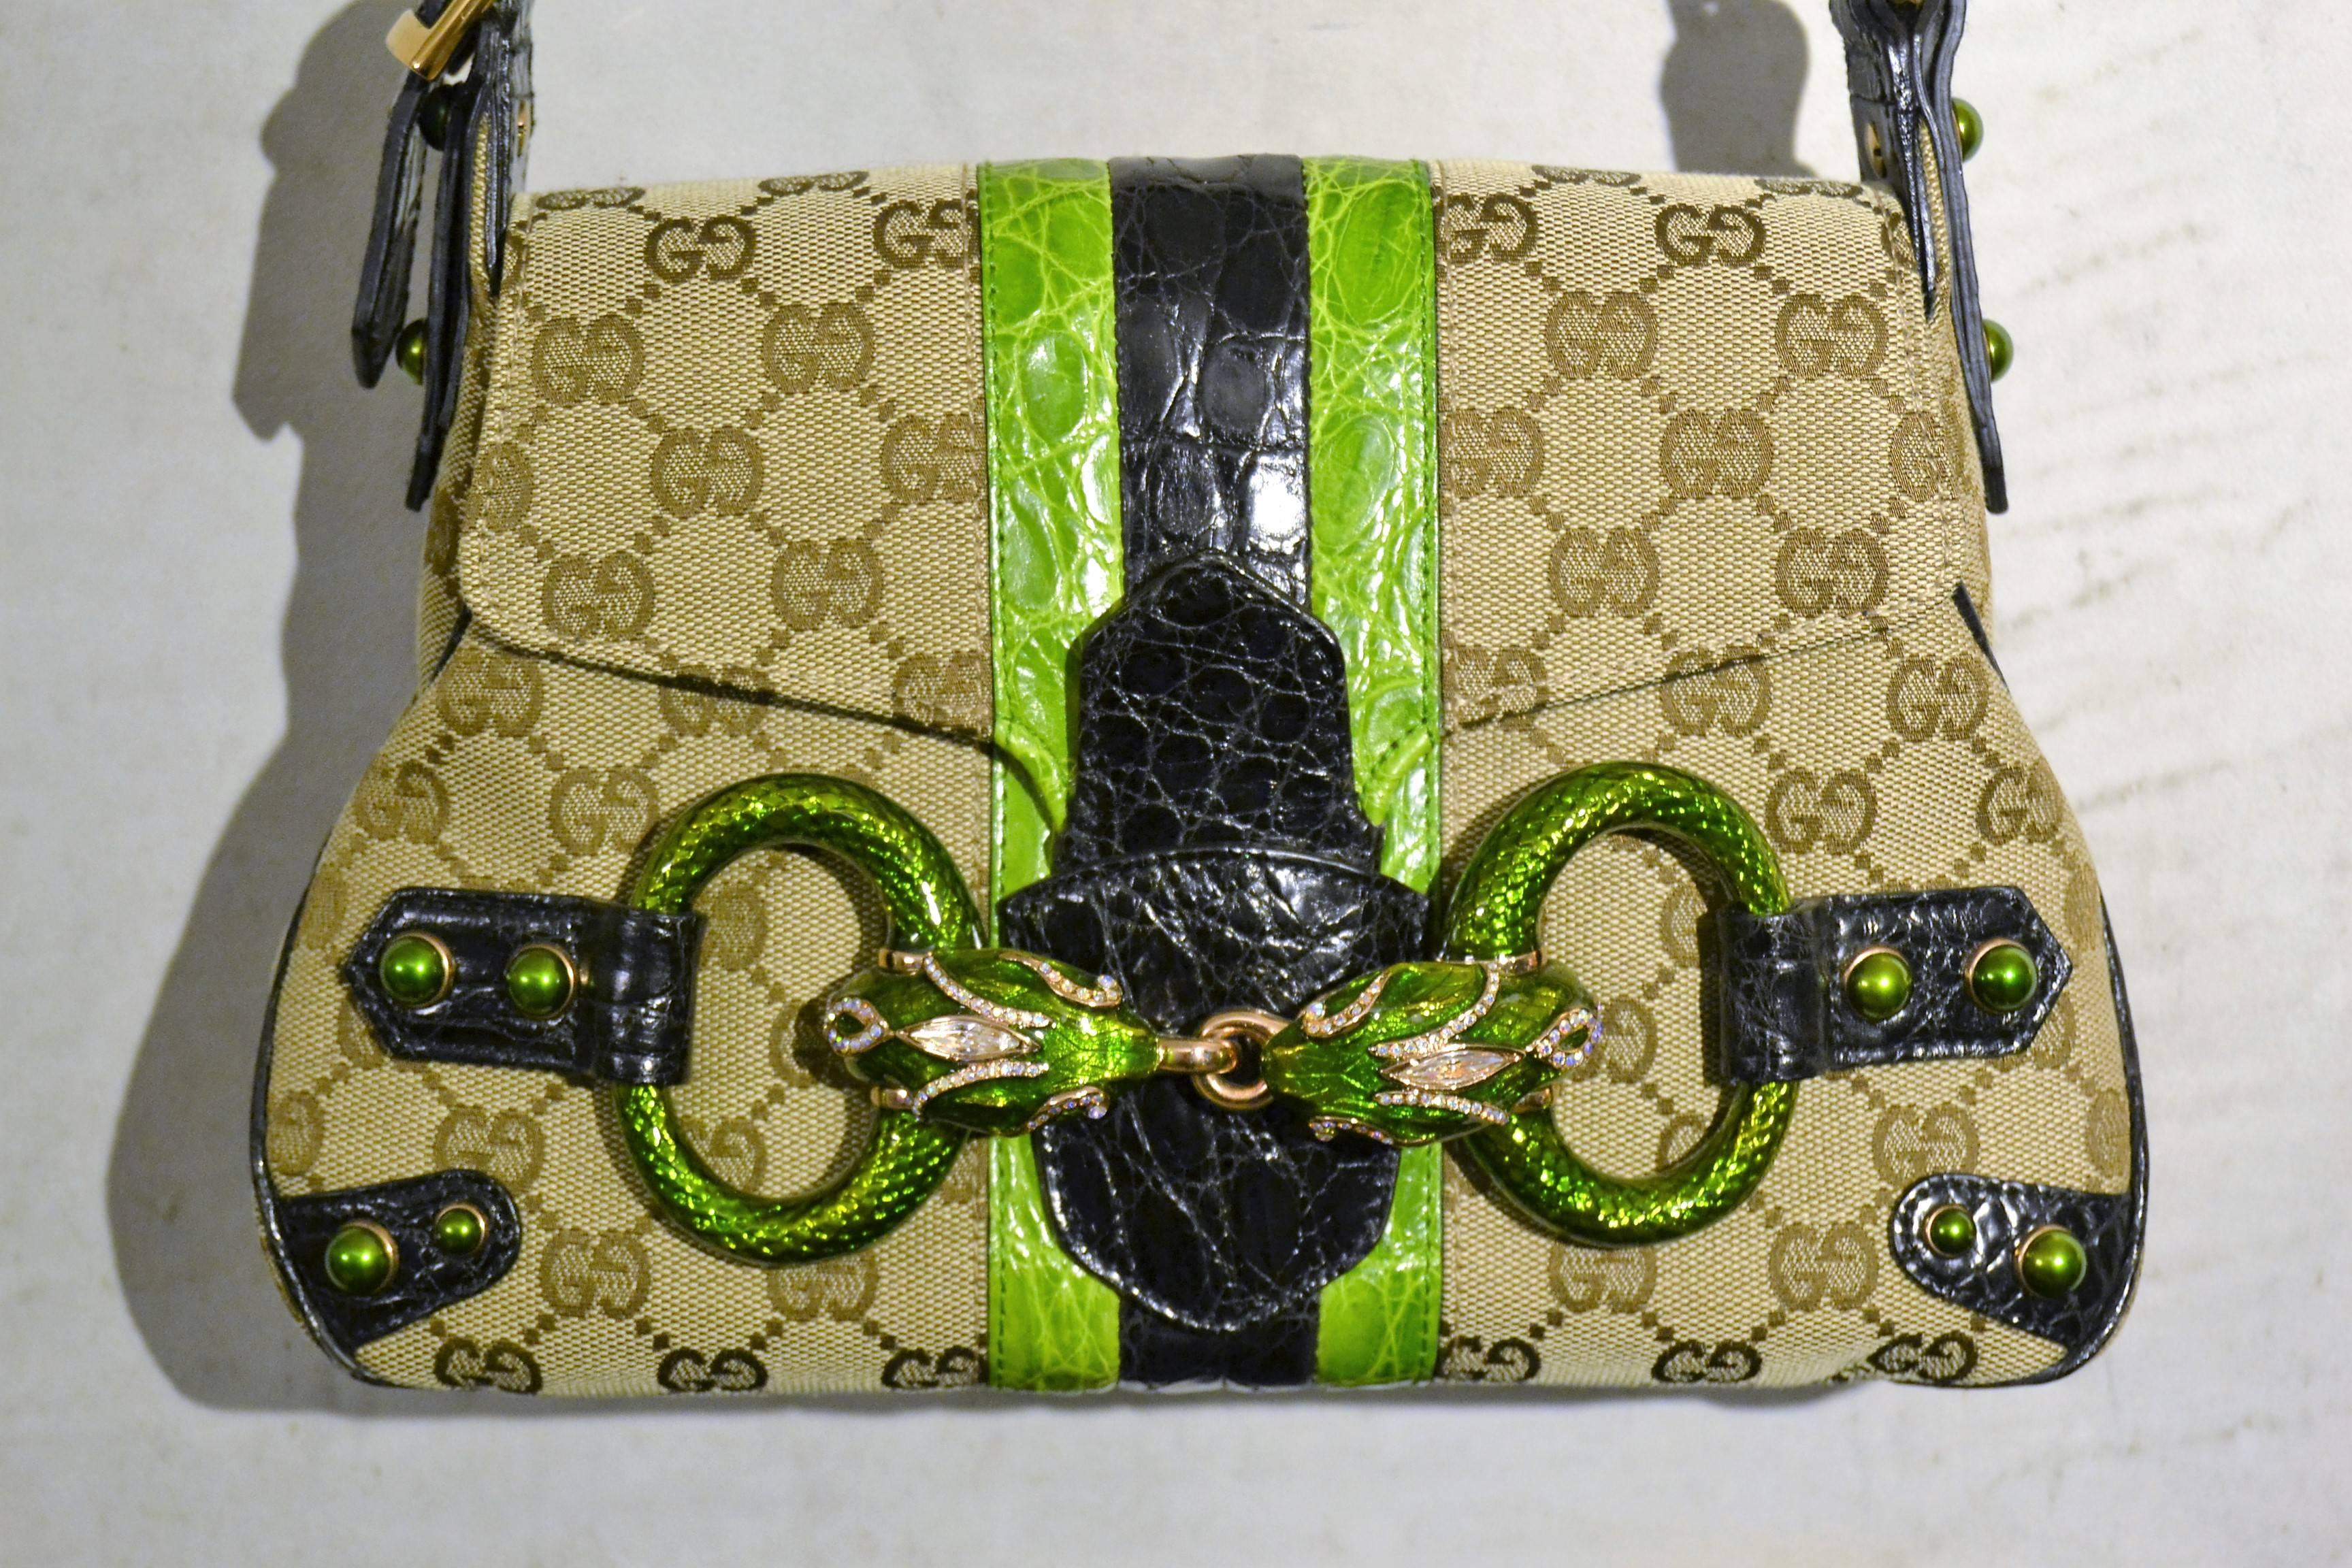 1990s Gucci monogram python skin bag

Unique, rage amazing bag by Gucci
in monogram and python green skin with snakes on the front covered with real swarovski